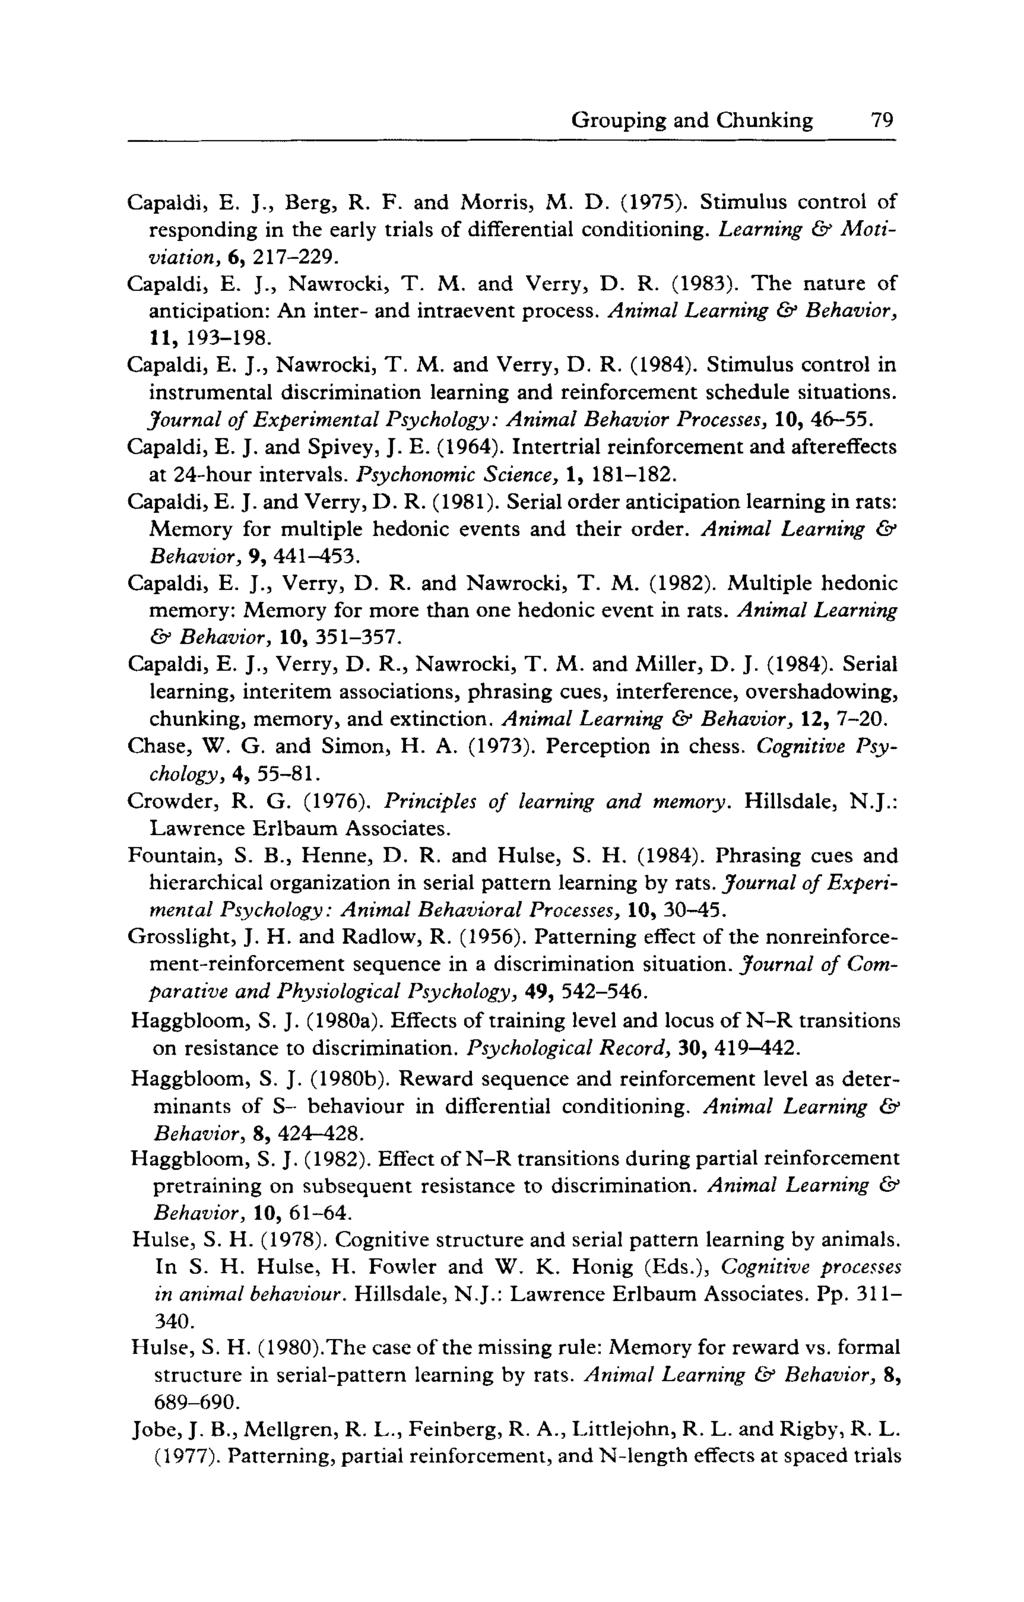 Grouping and Chunking 79 Capaldi, E. J., Berg, R. F. and Morris, M. D. (1975). Stimulus control of responding in the early trials of differential conditioning. Learning & Motiviation, 6, 217-229.